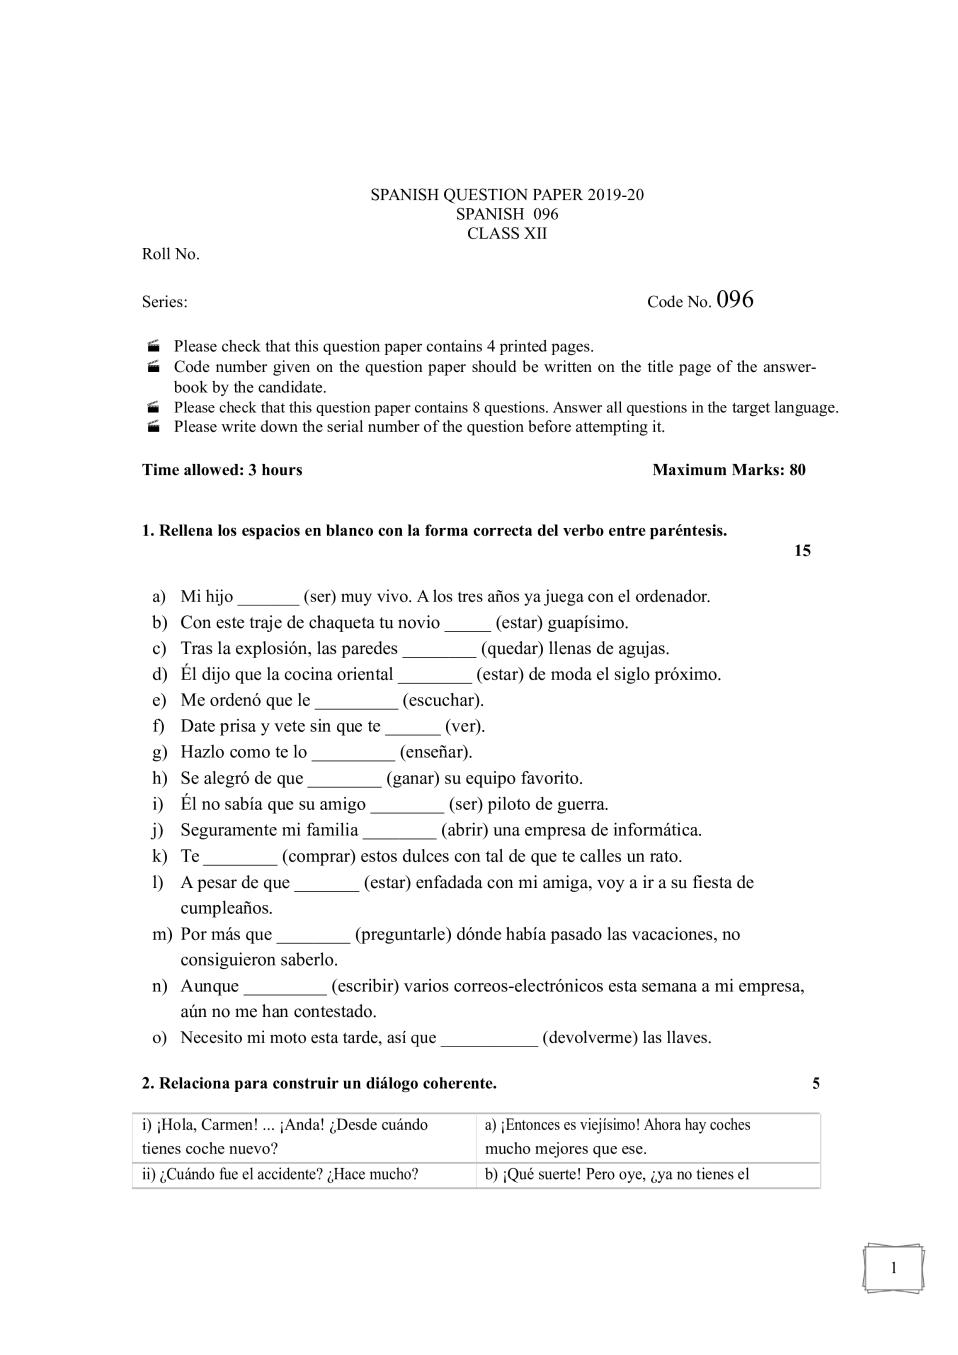 CBSE Class 12 Sample Paper 2020 for Spanish - Page 1